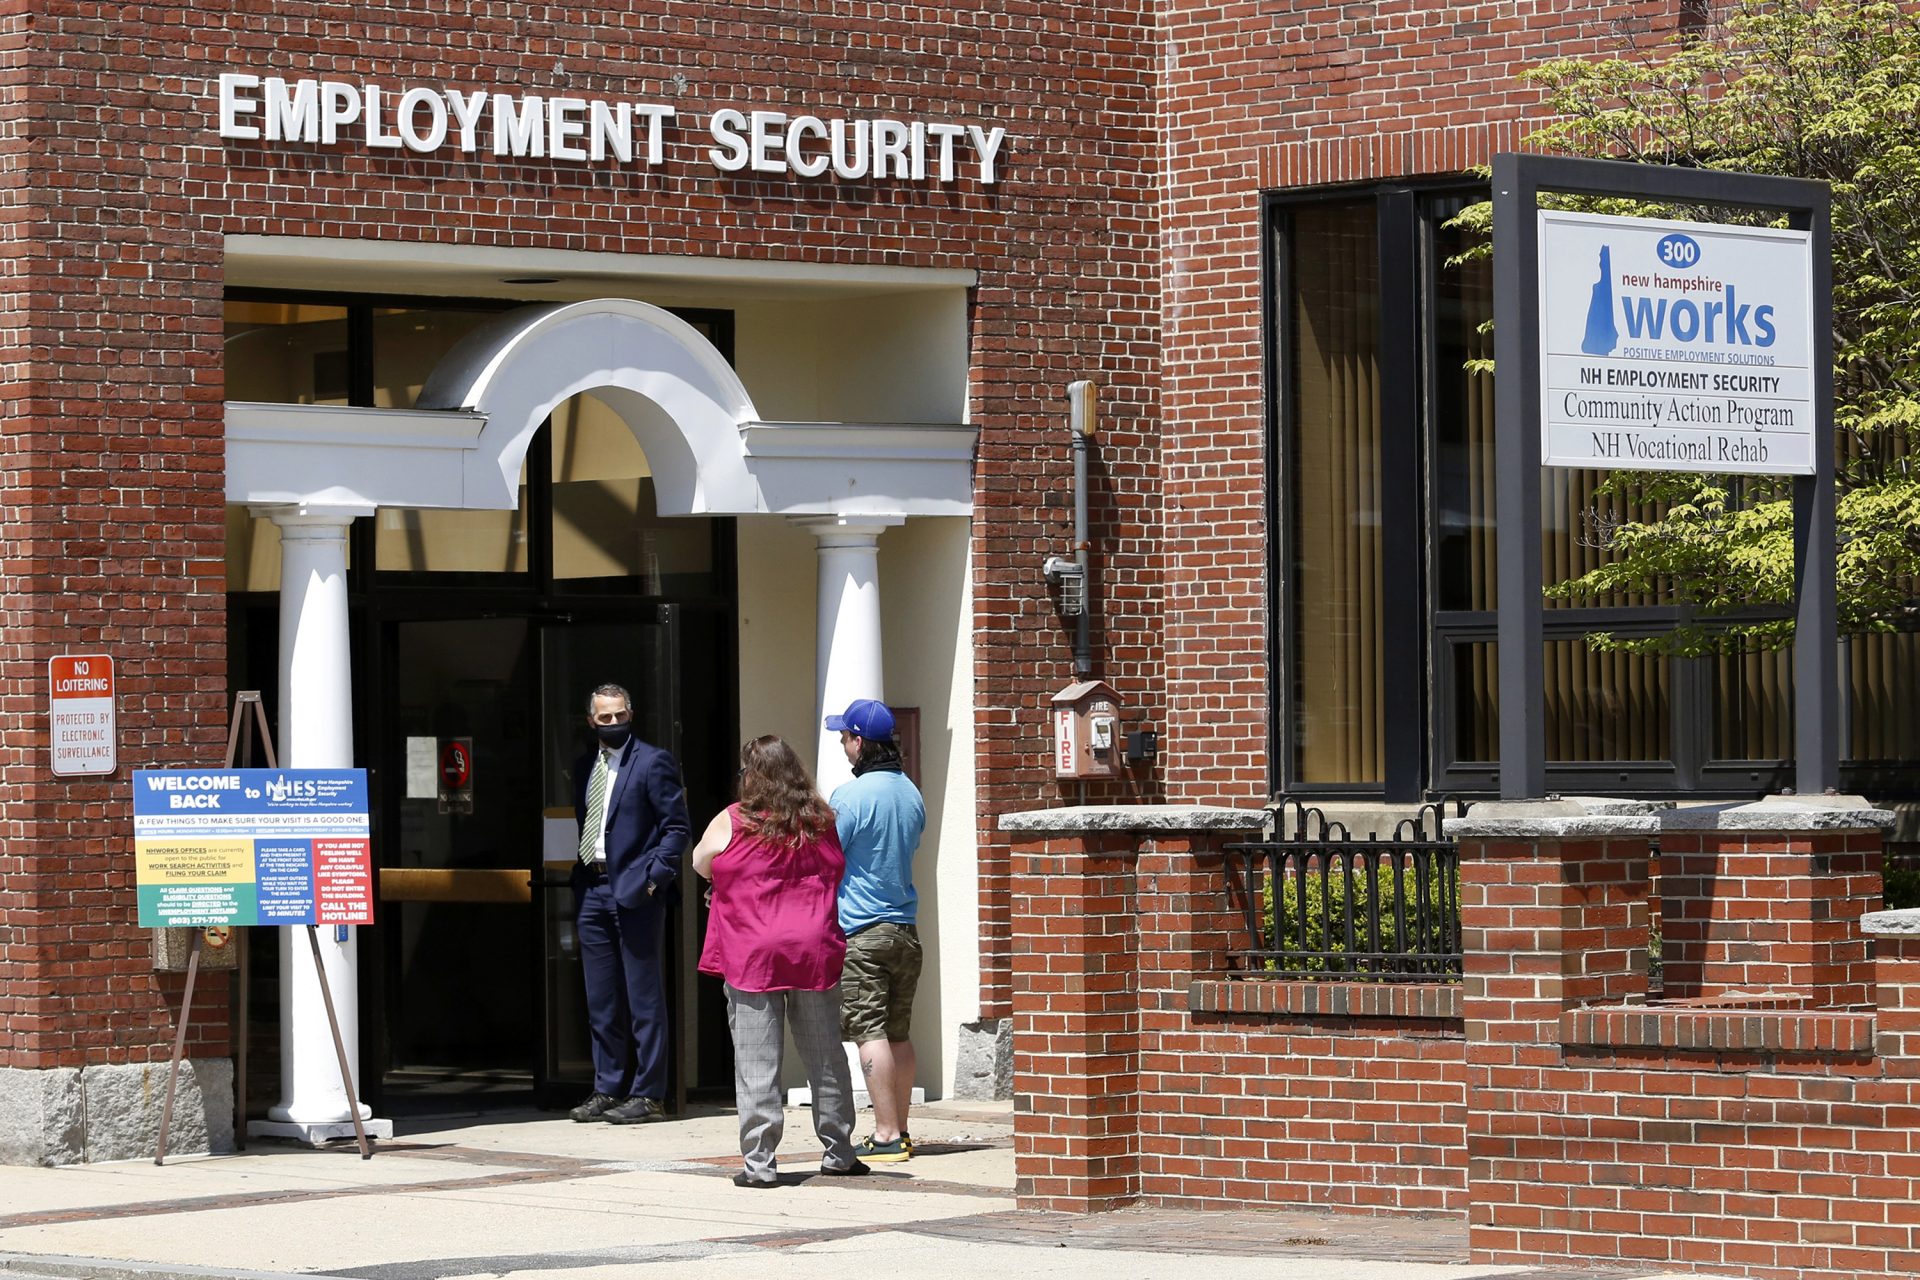 Job seekers line up outside the New Hampshire Works employment security job center, Monday, May 10, 2021, in Manchester, N.H.